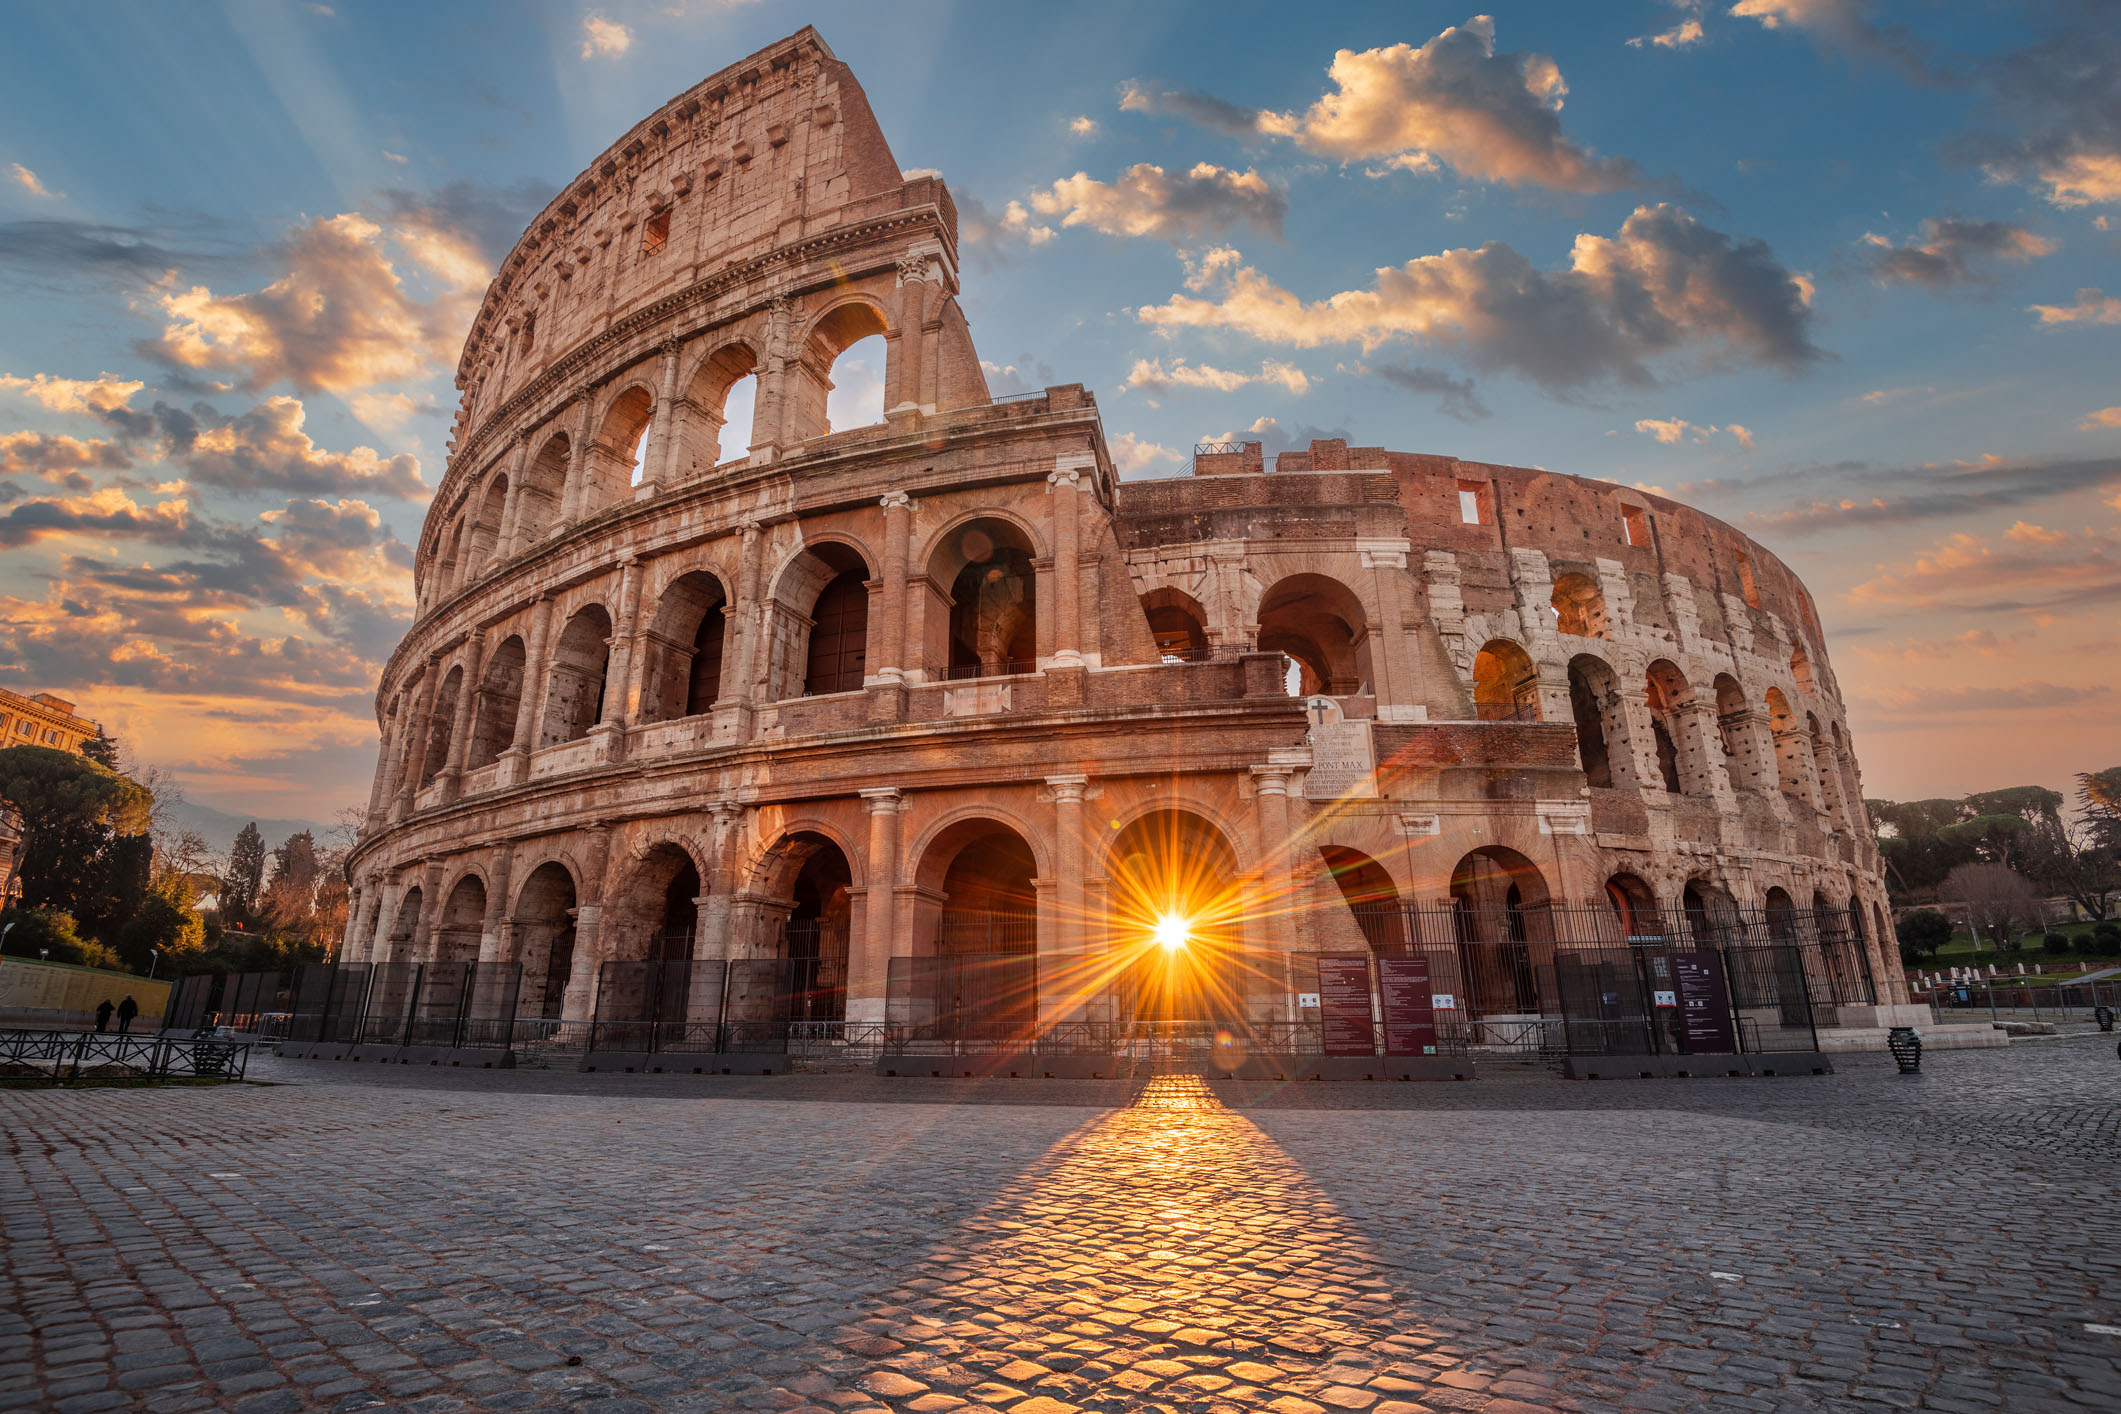 The Colosseum Amphitheater in Rome, Italy, with the sunrise visible through the entranceway